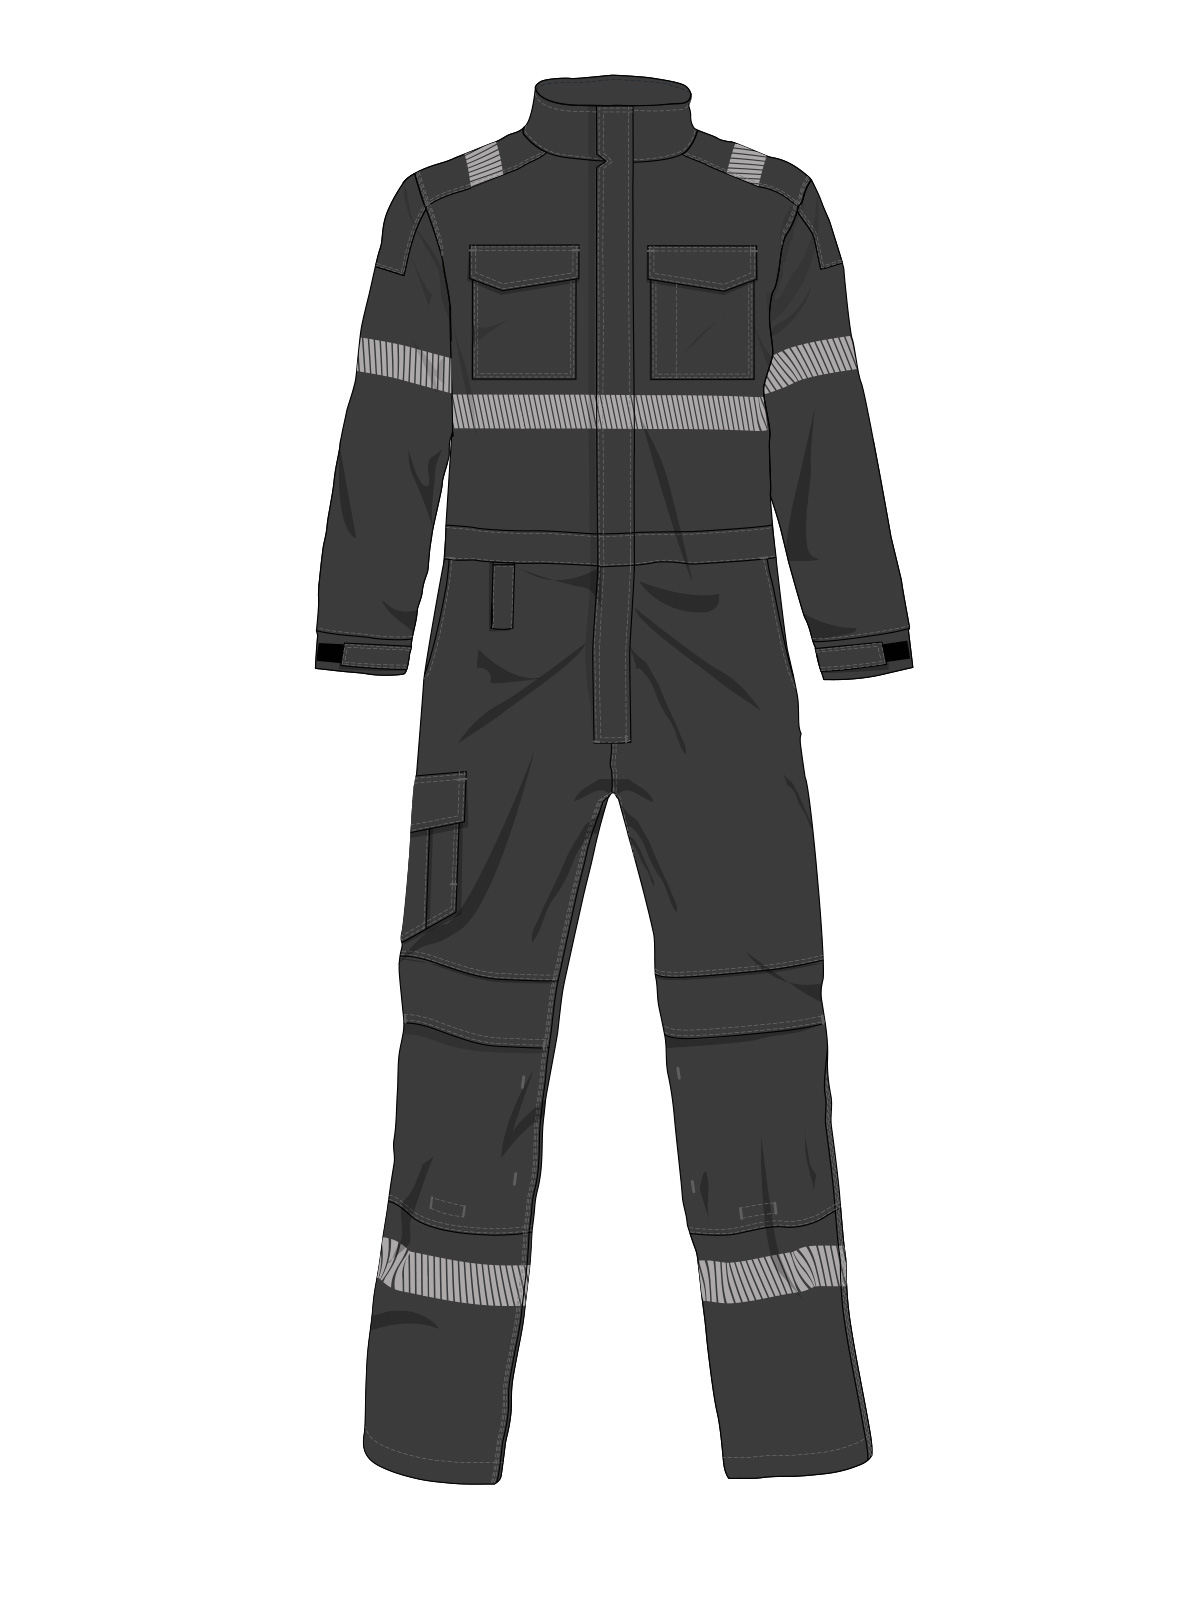 ArcLite FR Coverall